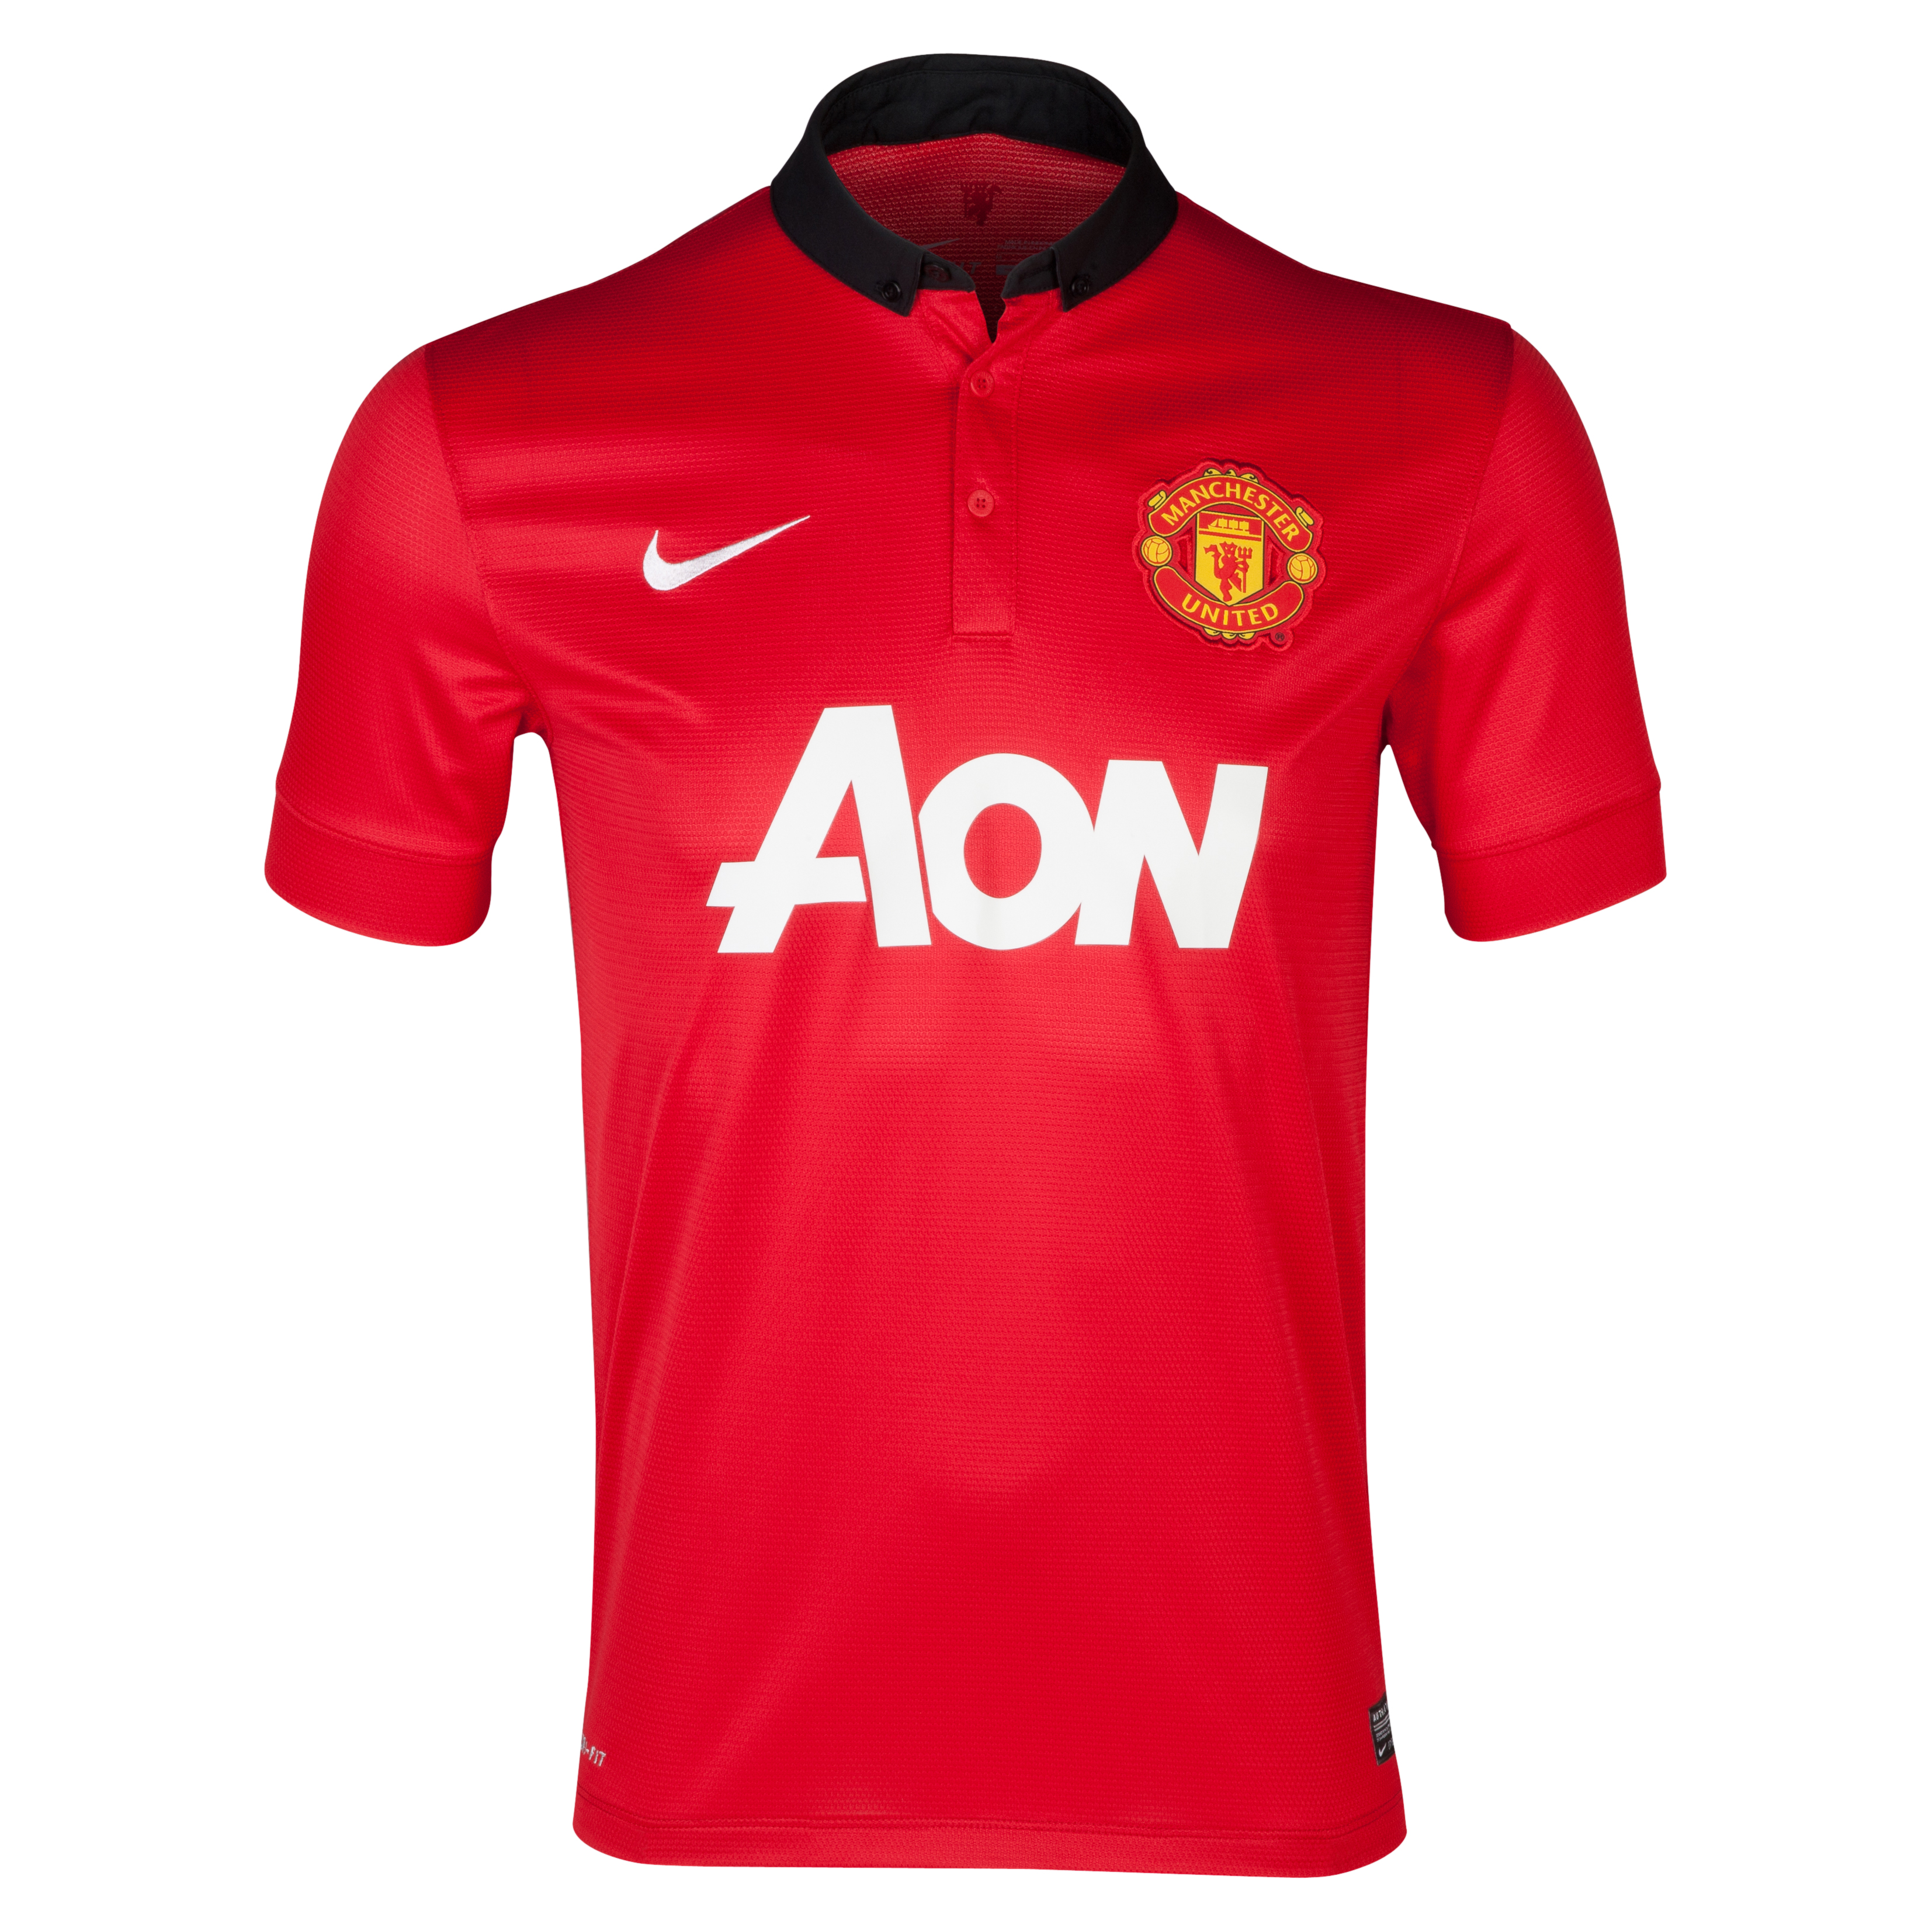 Manchester United Home Shirt 2013/14